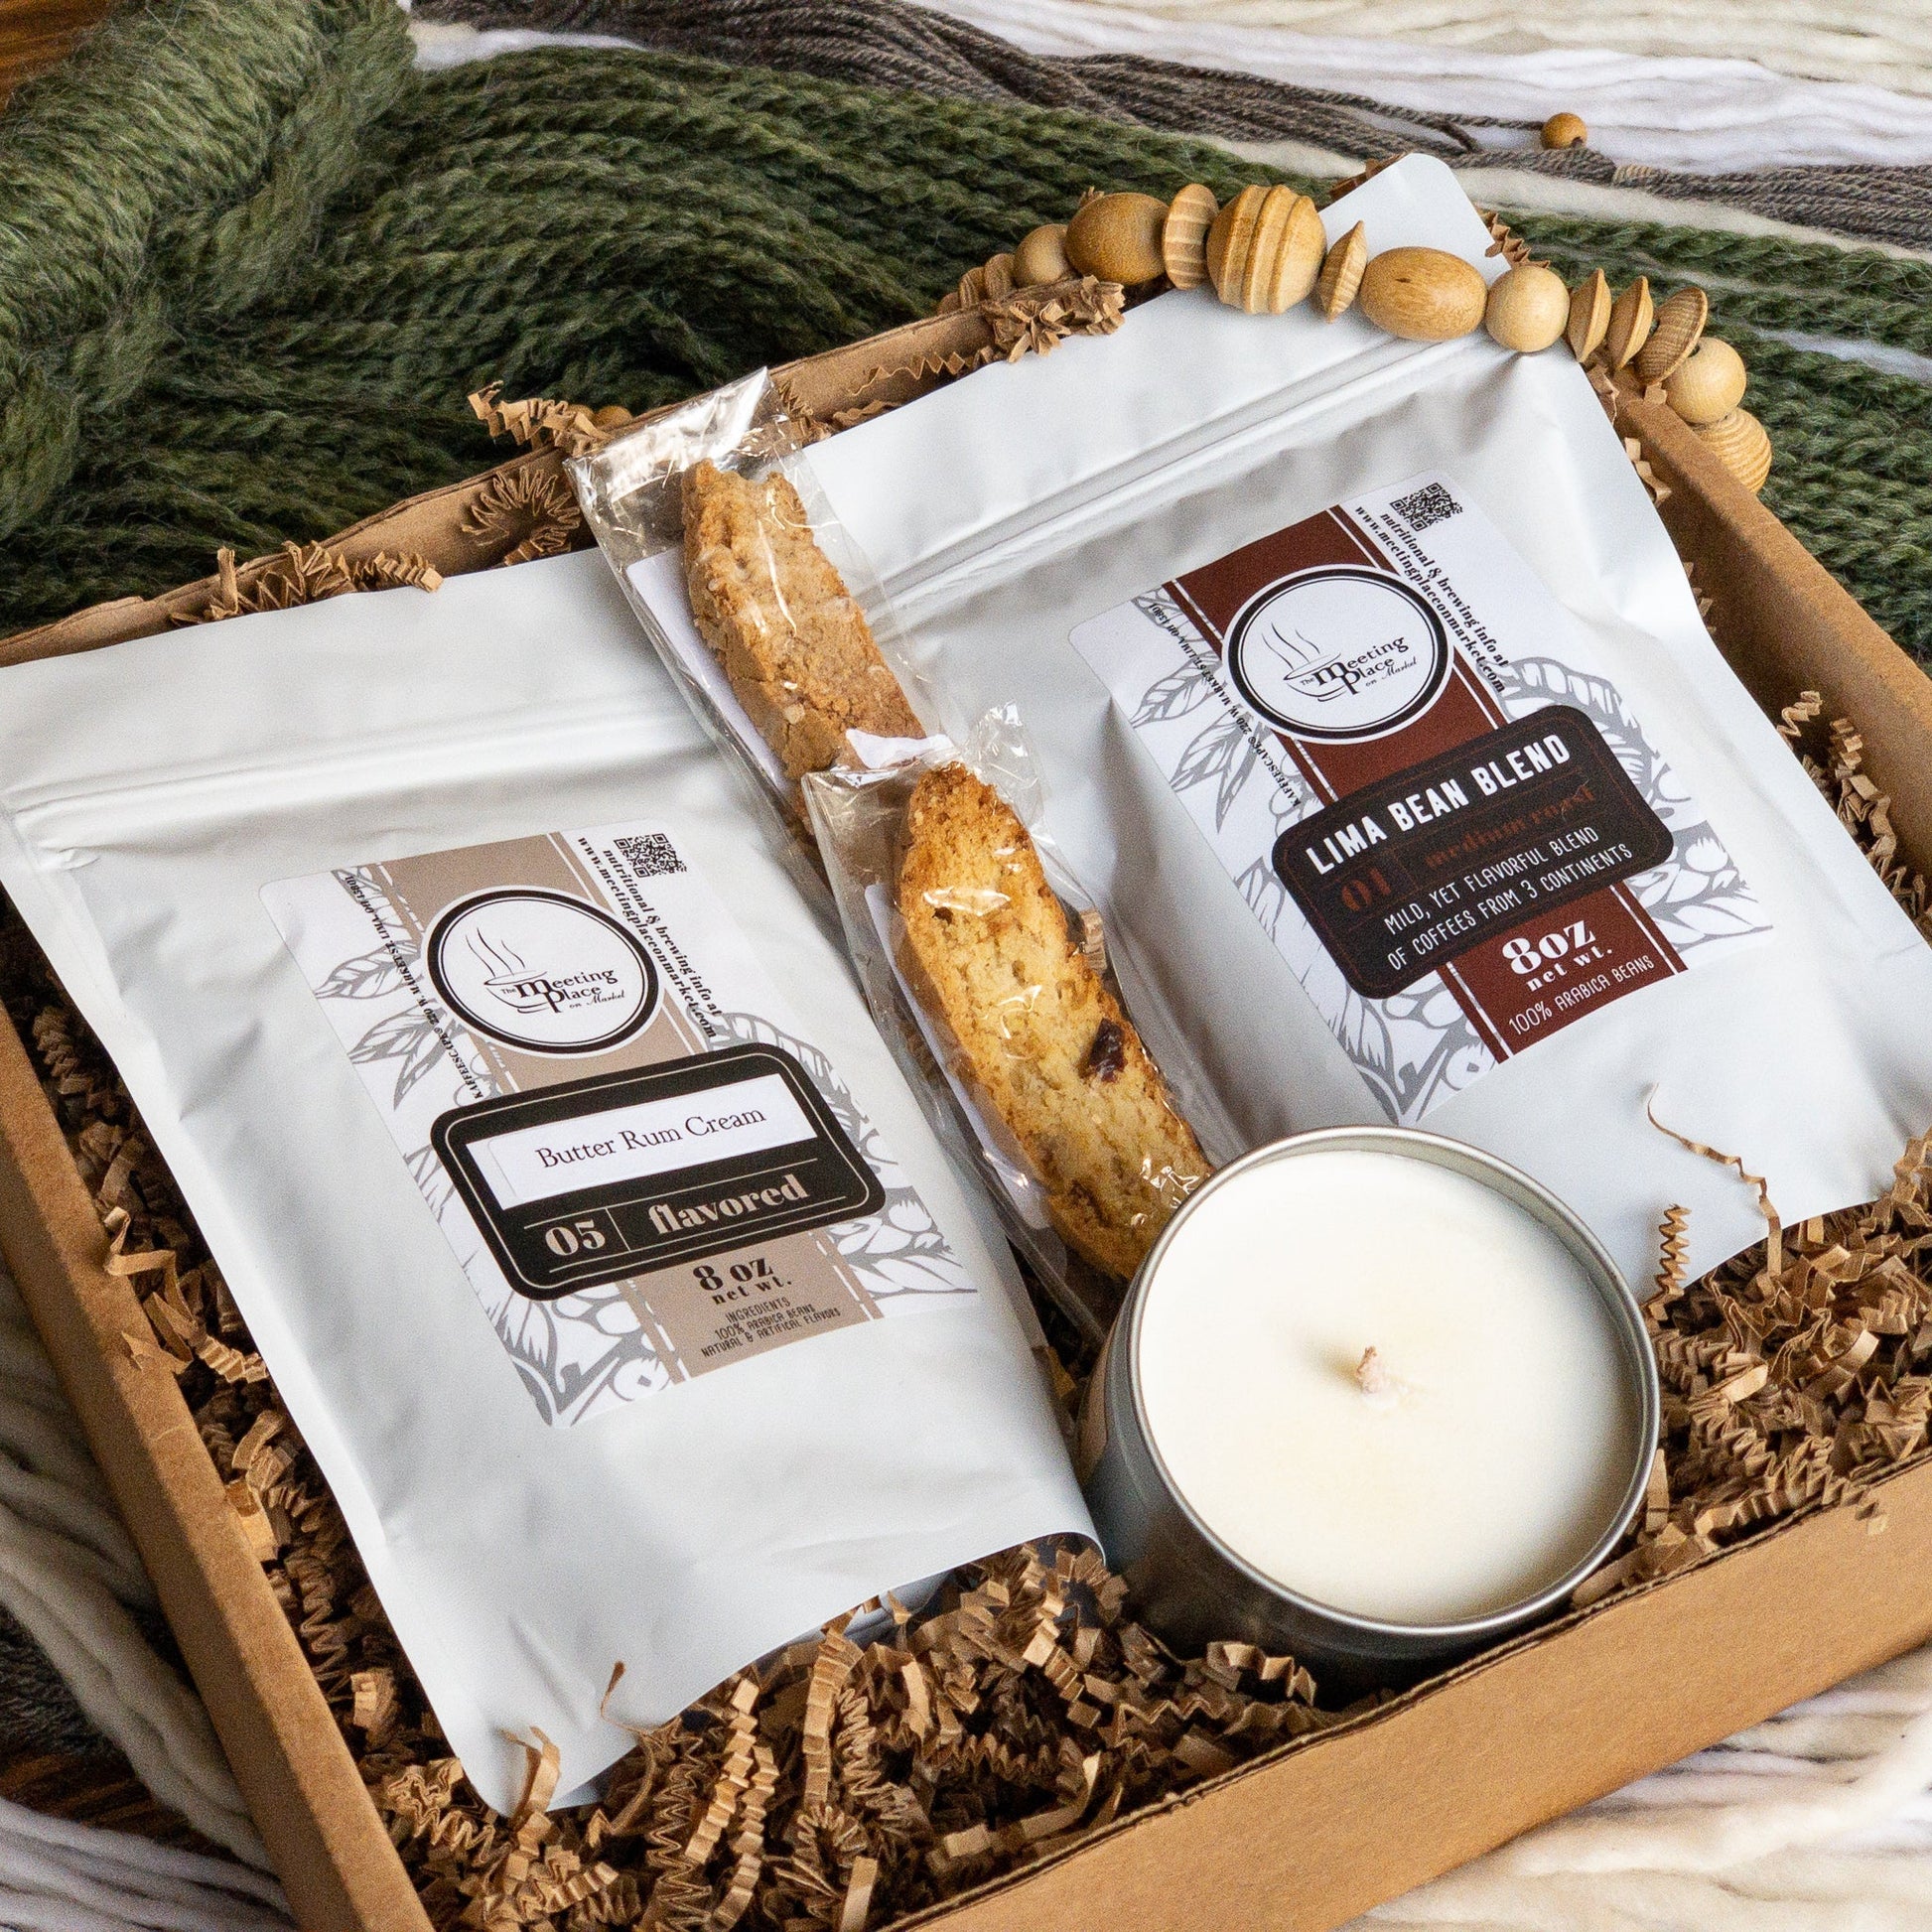 Handmade Candle and Gourmet Coffee Gift Basket Gift Box - The Meeting Place on Market